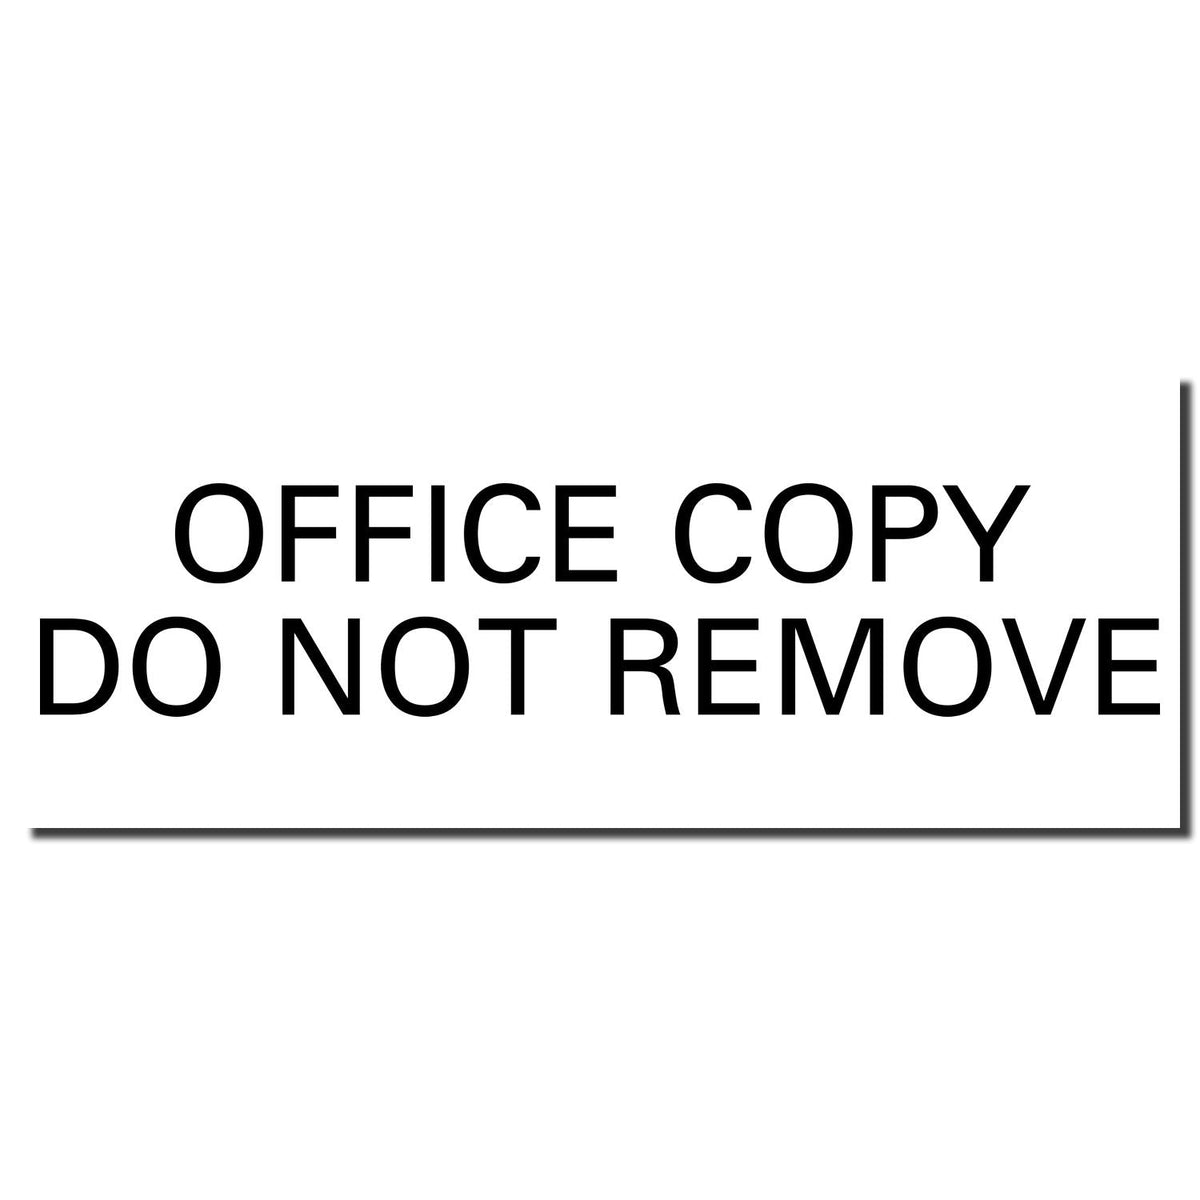 Enlarged Imprint Self-Inking Office Copy Do Not Remove Stamp Sample